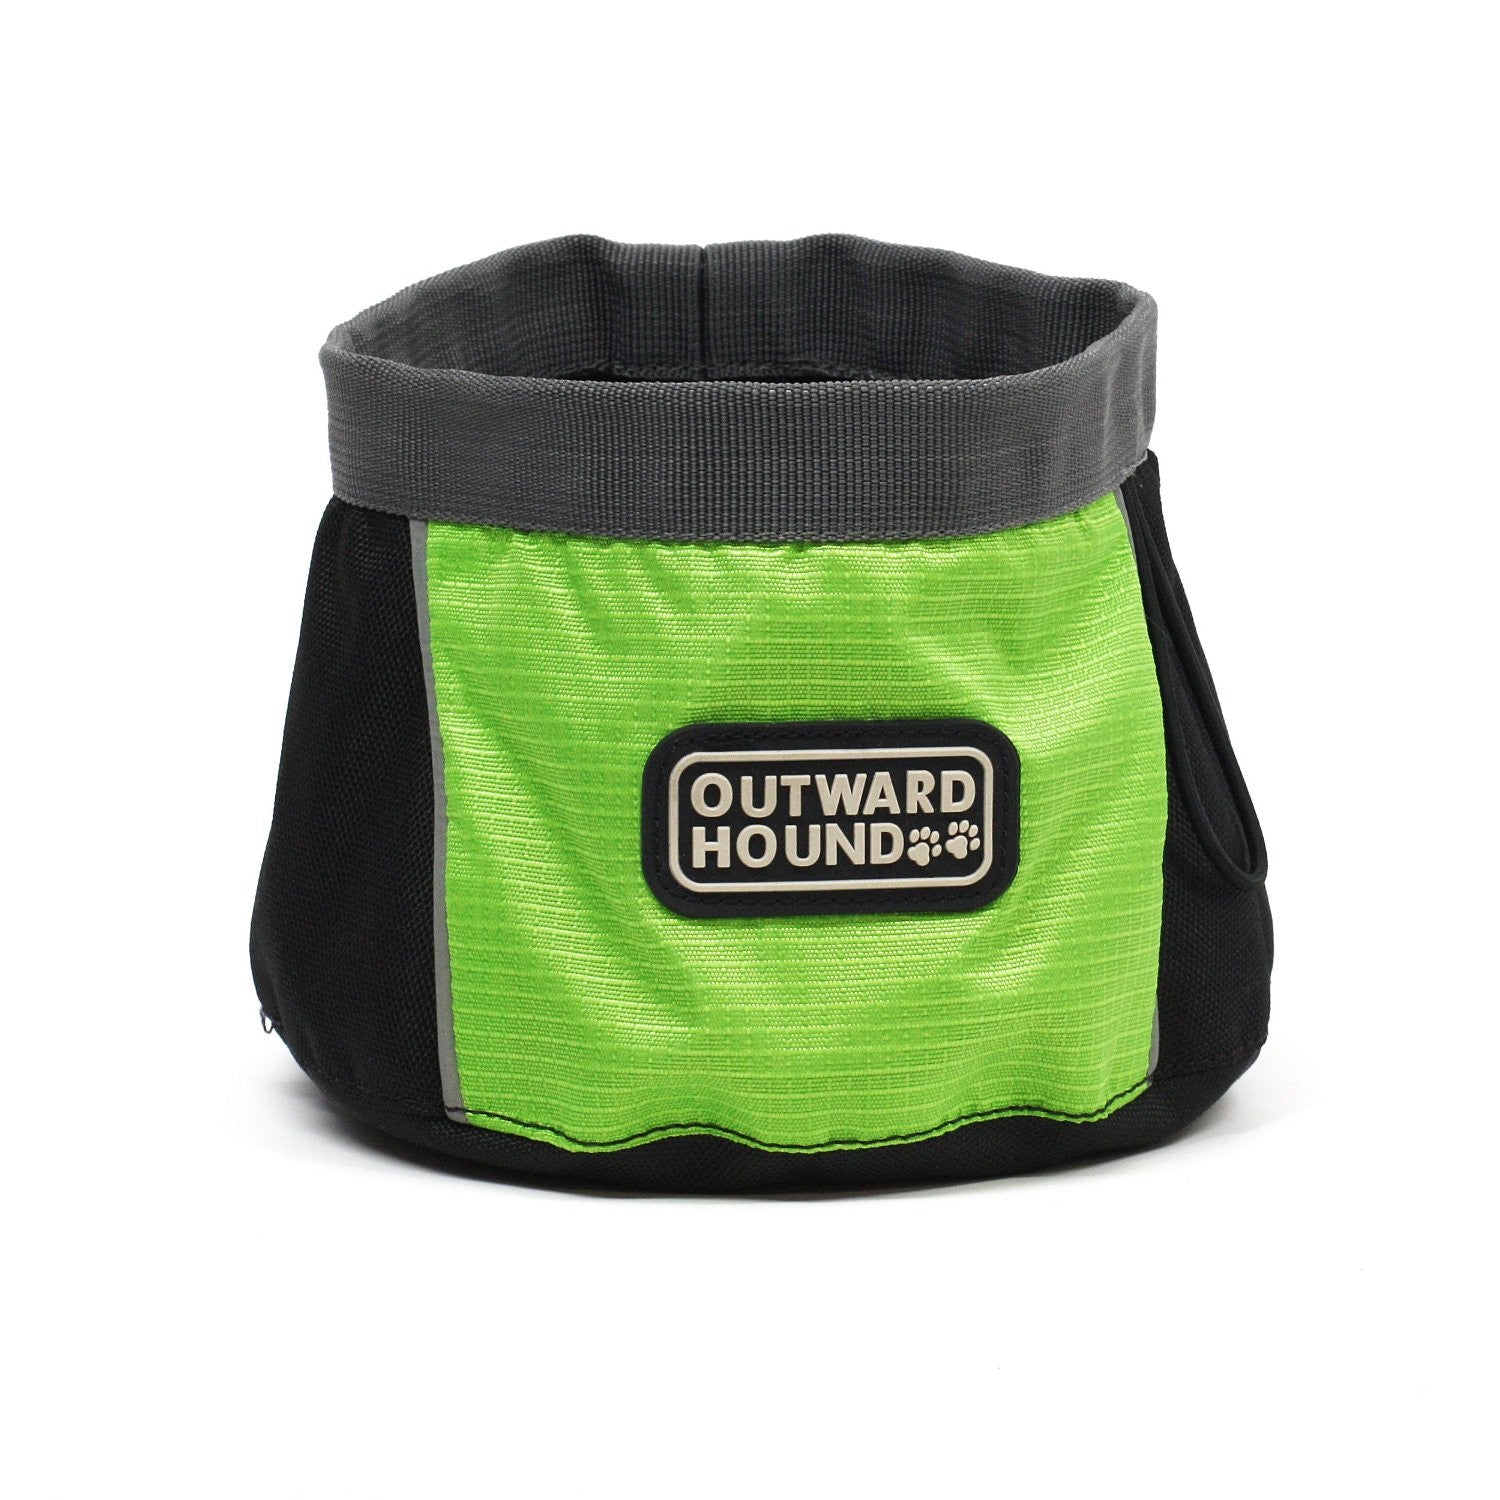 Outward Hound 2483 Port-a-bowl Collapsible Travel Dog Food/water Bowl, Large, Green